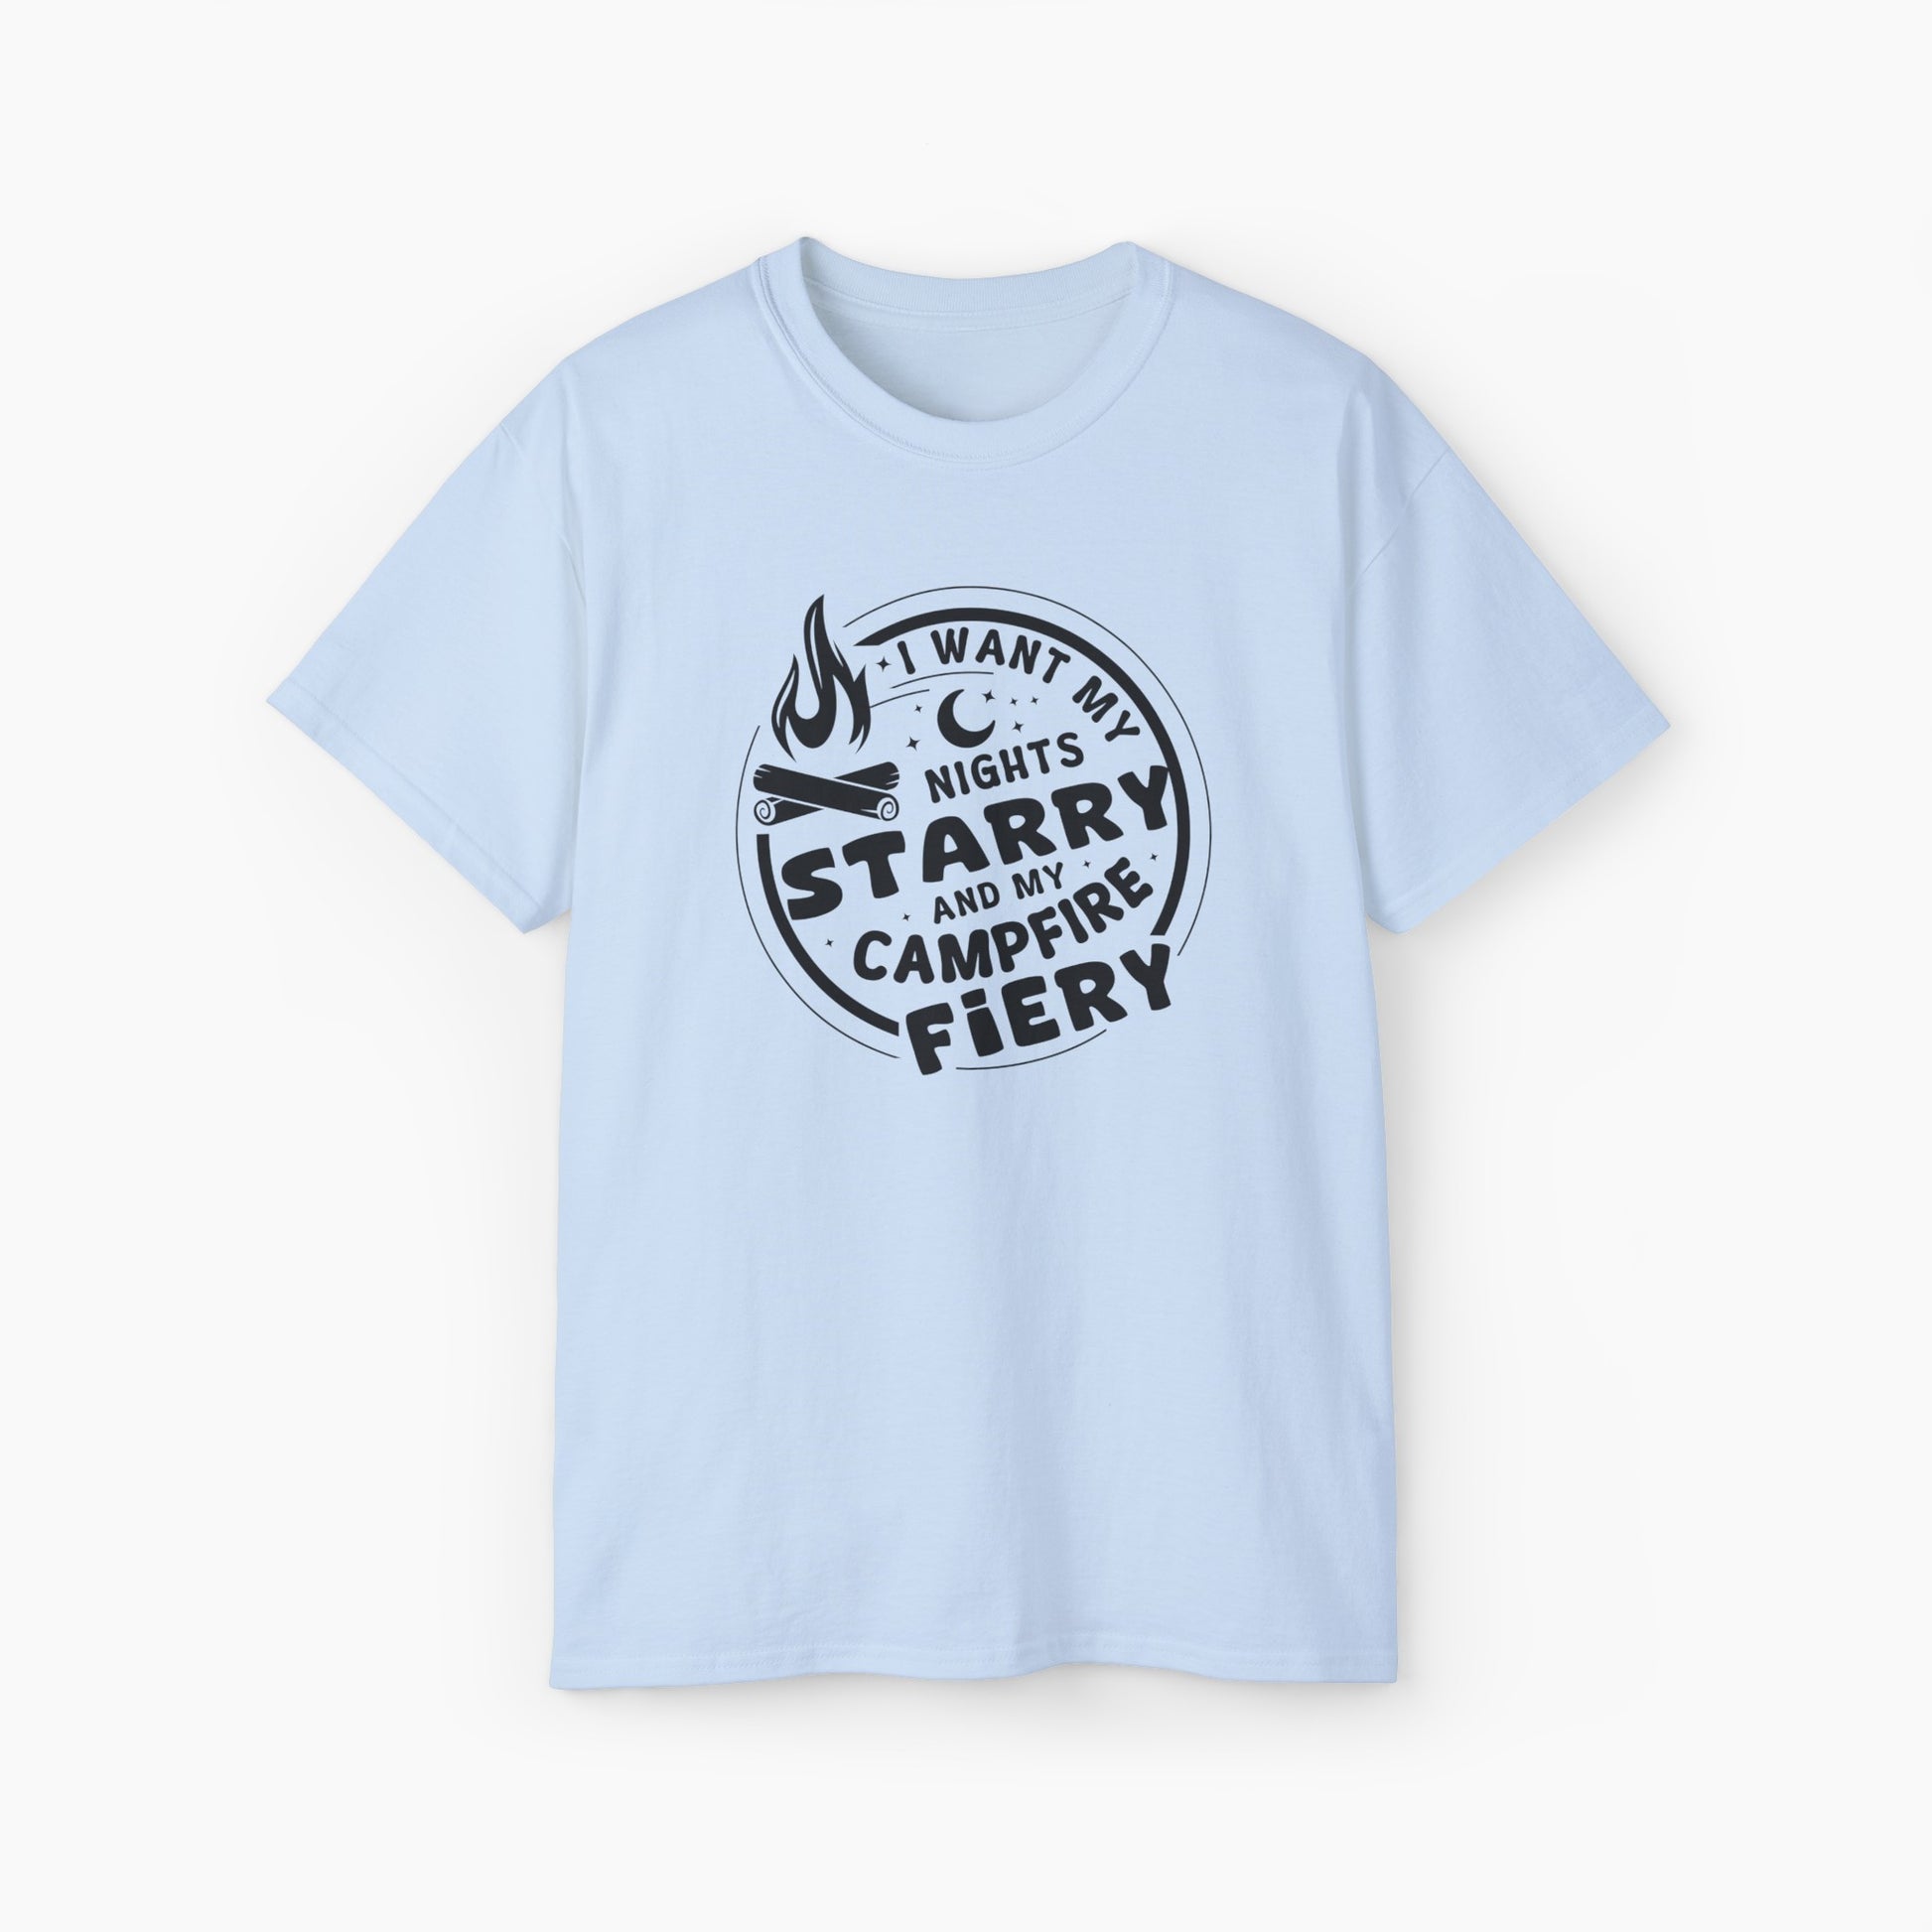 Light blue t-shirt with the text 'I want my nights starry and my campfire fiery' in a circular design, featuring a campfire, stars, and moon on a plain background.